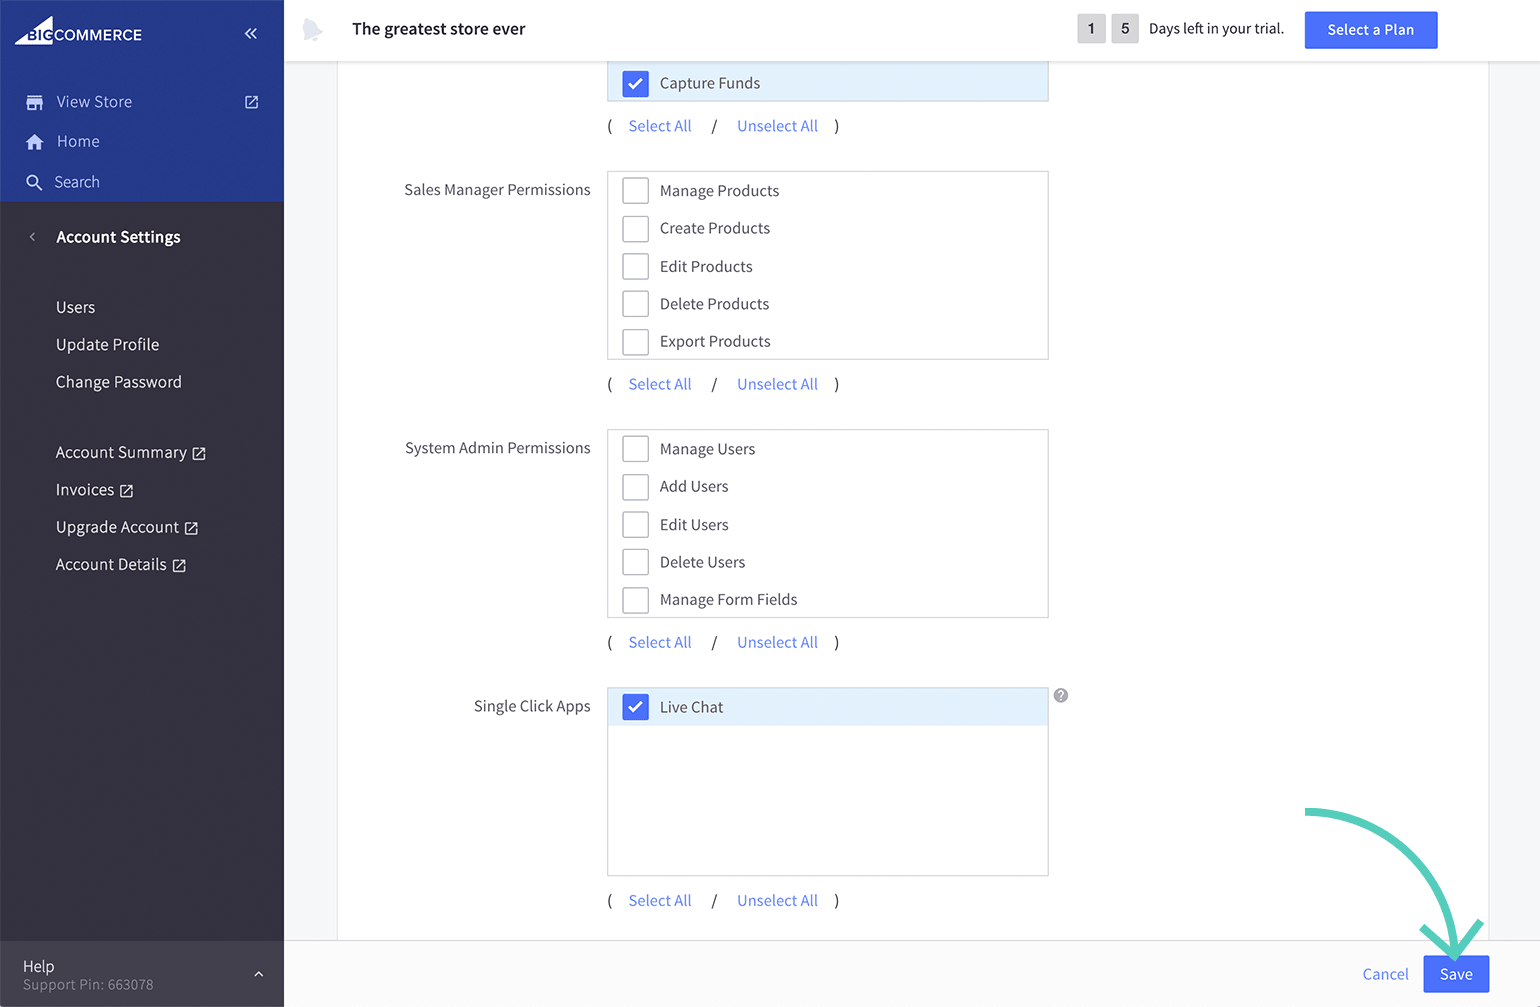 Save changes made to user settings